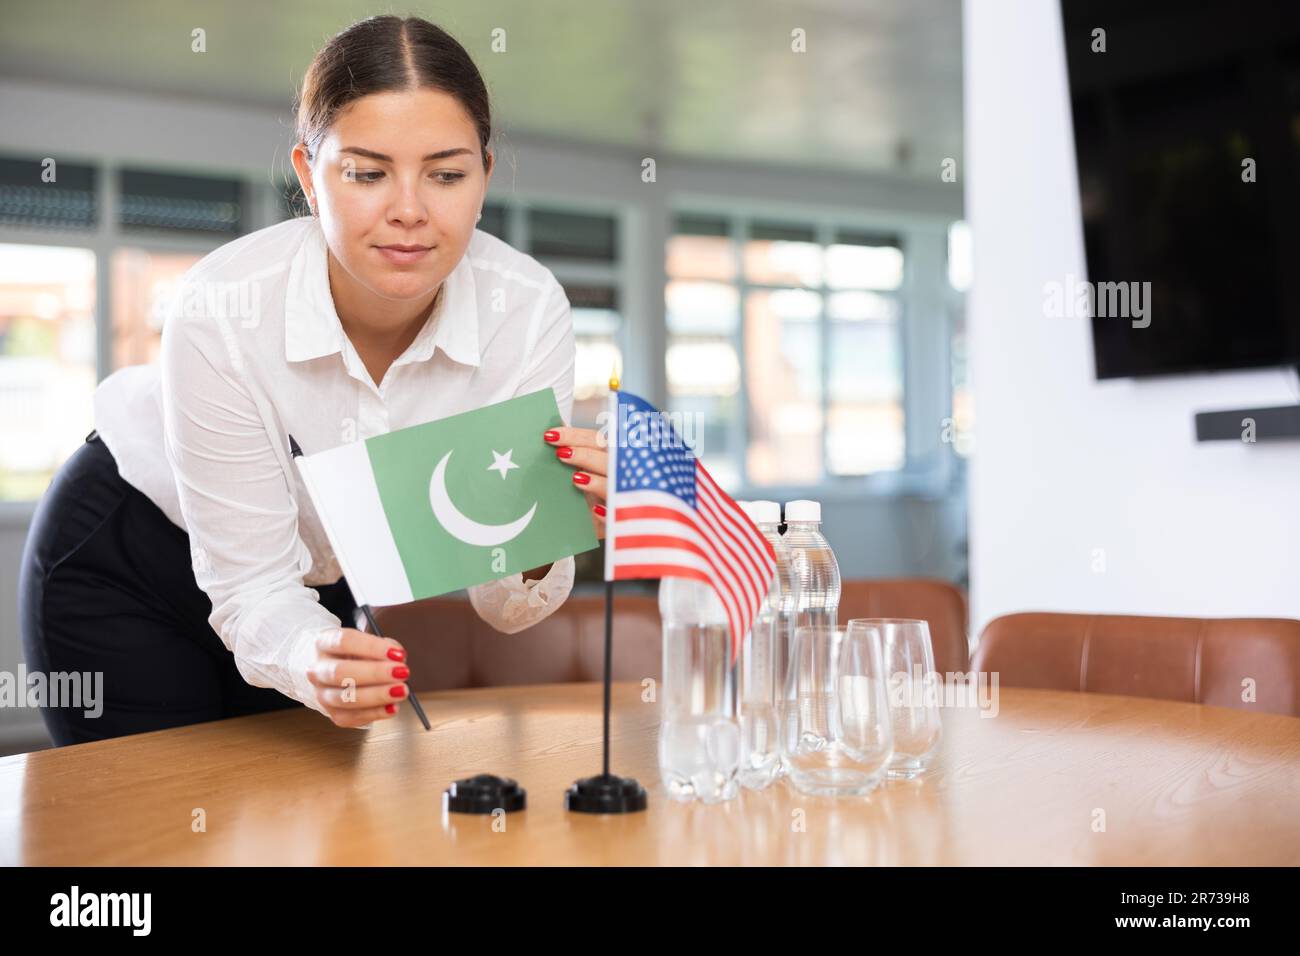 Young woman putting flags of Pakistan and USA on table in office Stock Photo